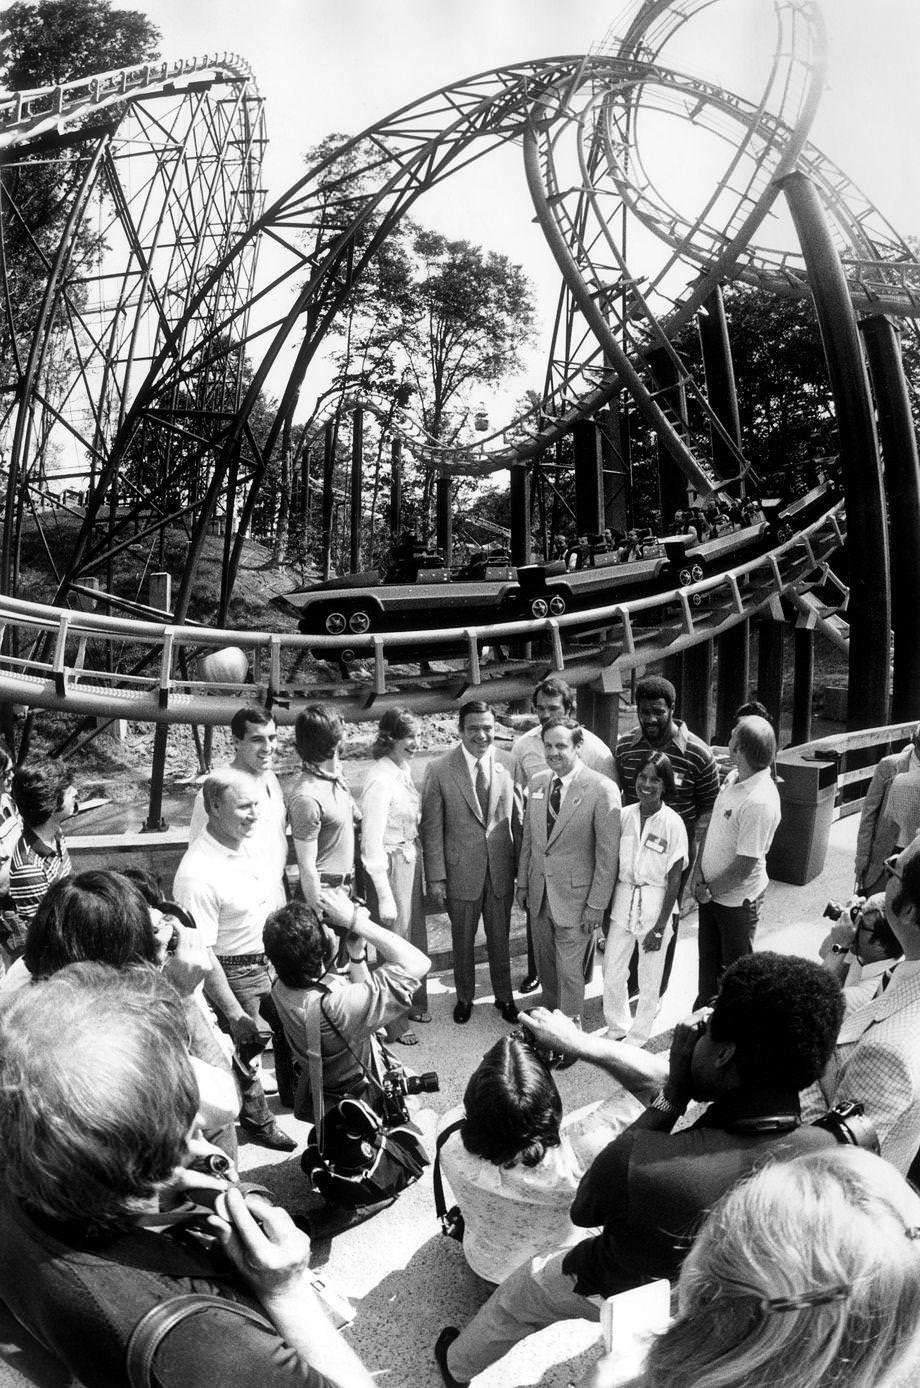 Crowds gathered at the Busch Gardens amusement park near Williamsburg for the grand opening of the Loch Ness Monster roller coaster, which featured quick acceleration, a 13-story drop and a pair of interlocking loops, 1978.